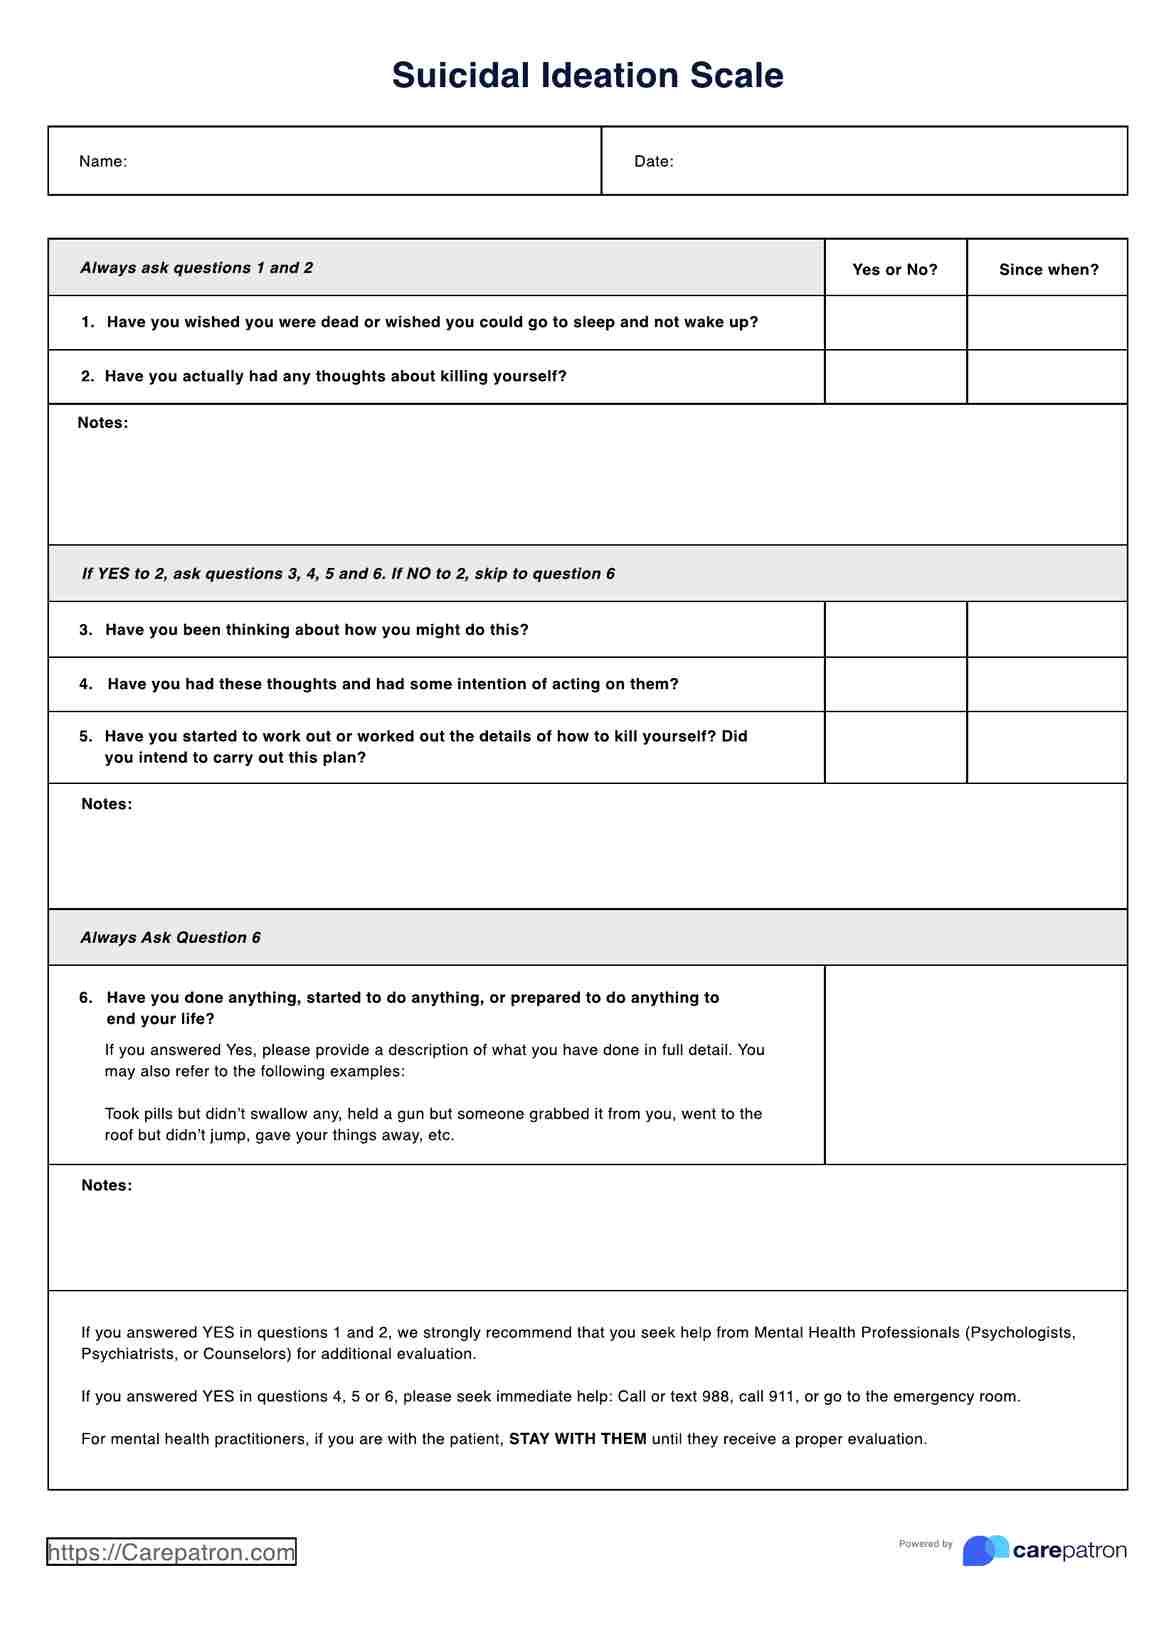 Suicidal Ideation Scales PDF Example